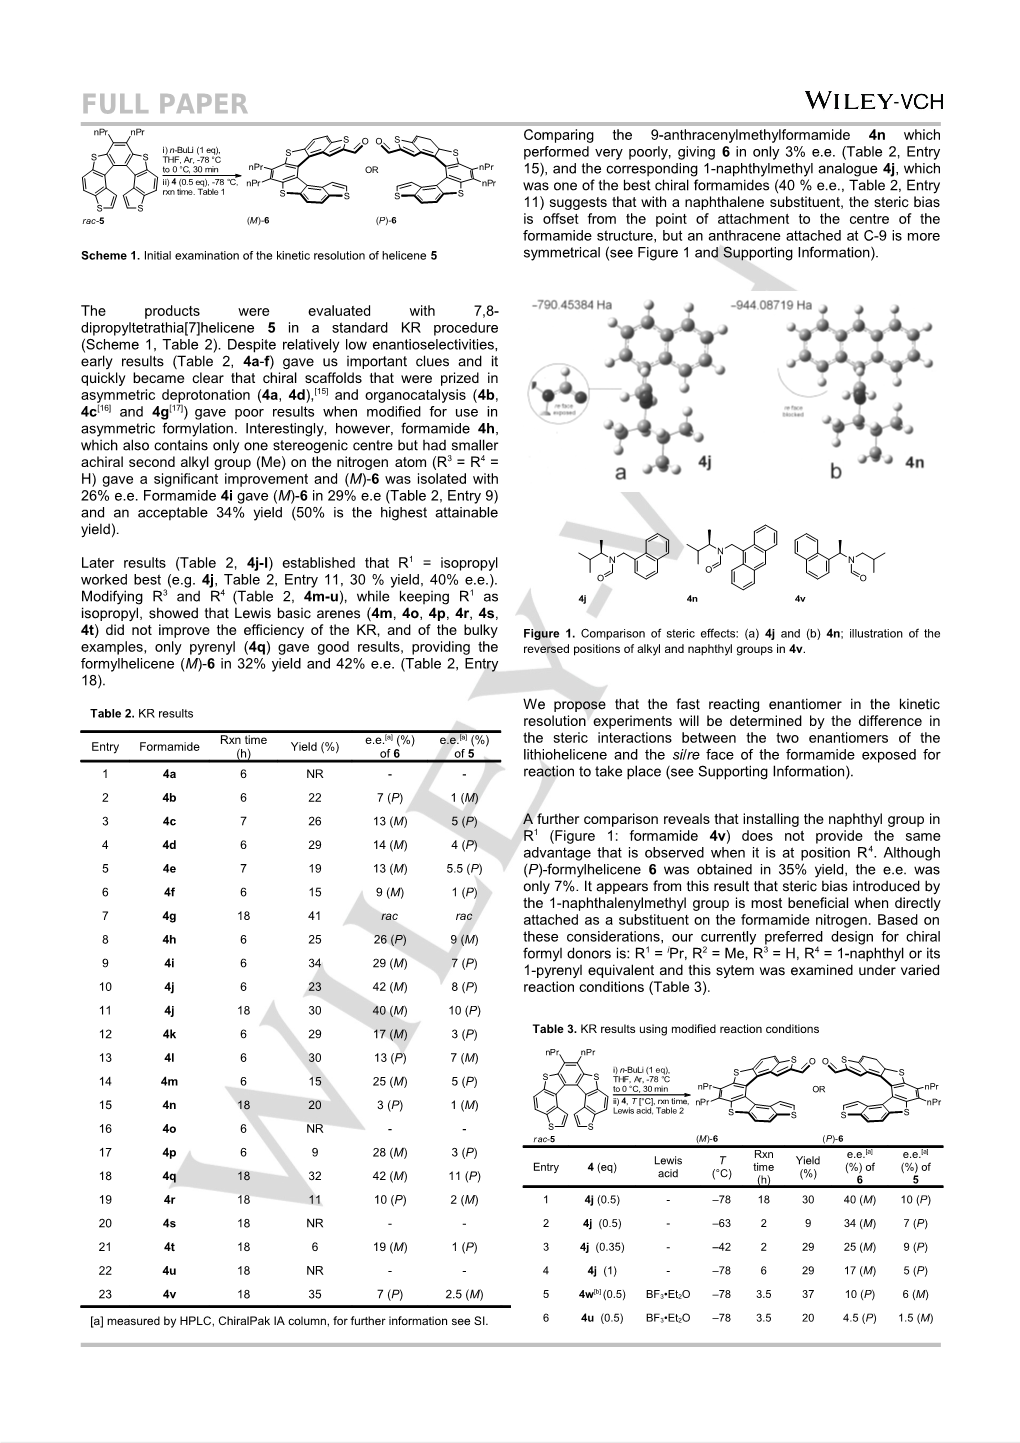 Novel Asymmetric Formylation of Aromatic Compounds: Enantioselective Synthesis of Formyl